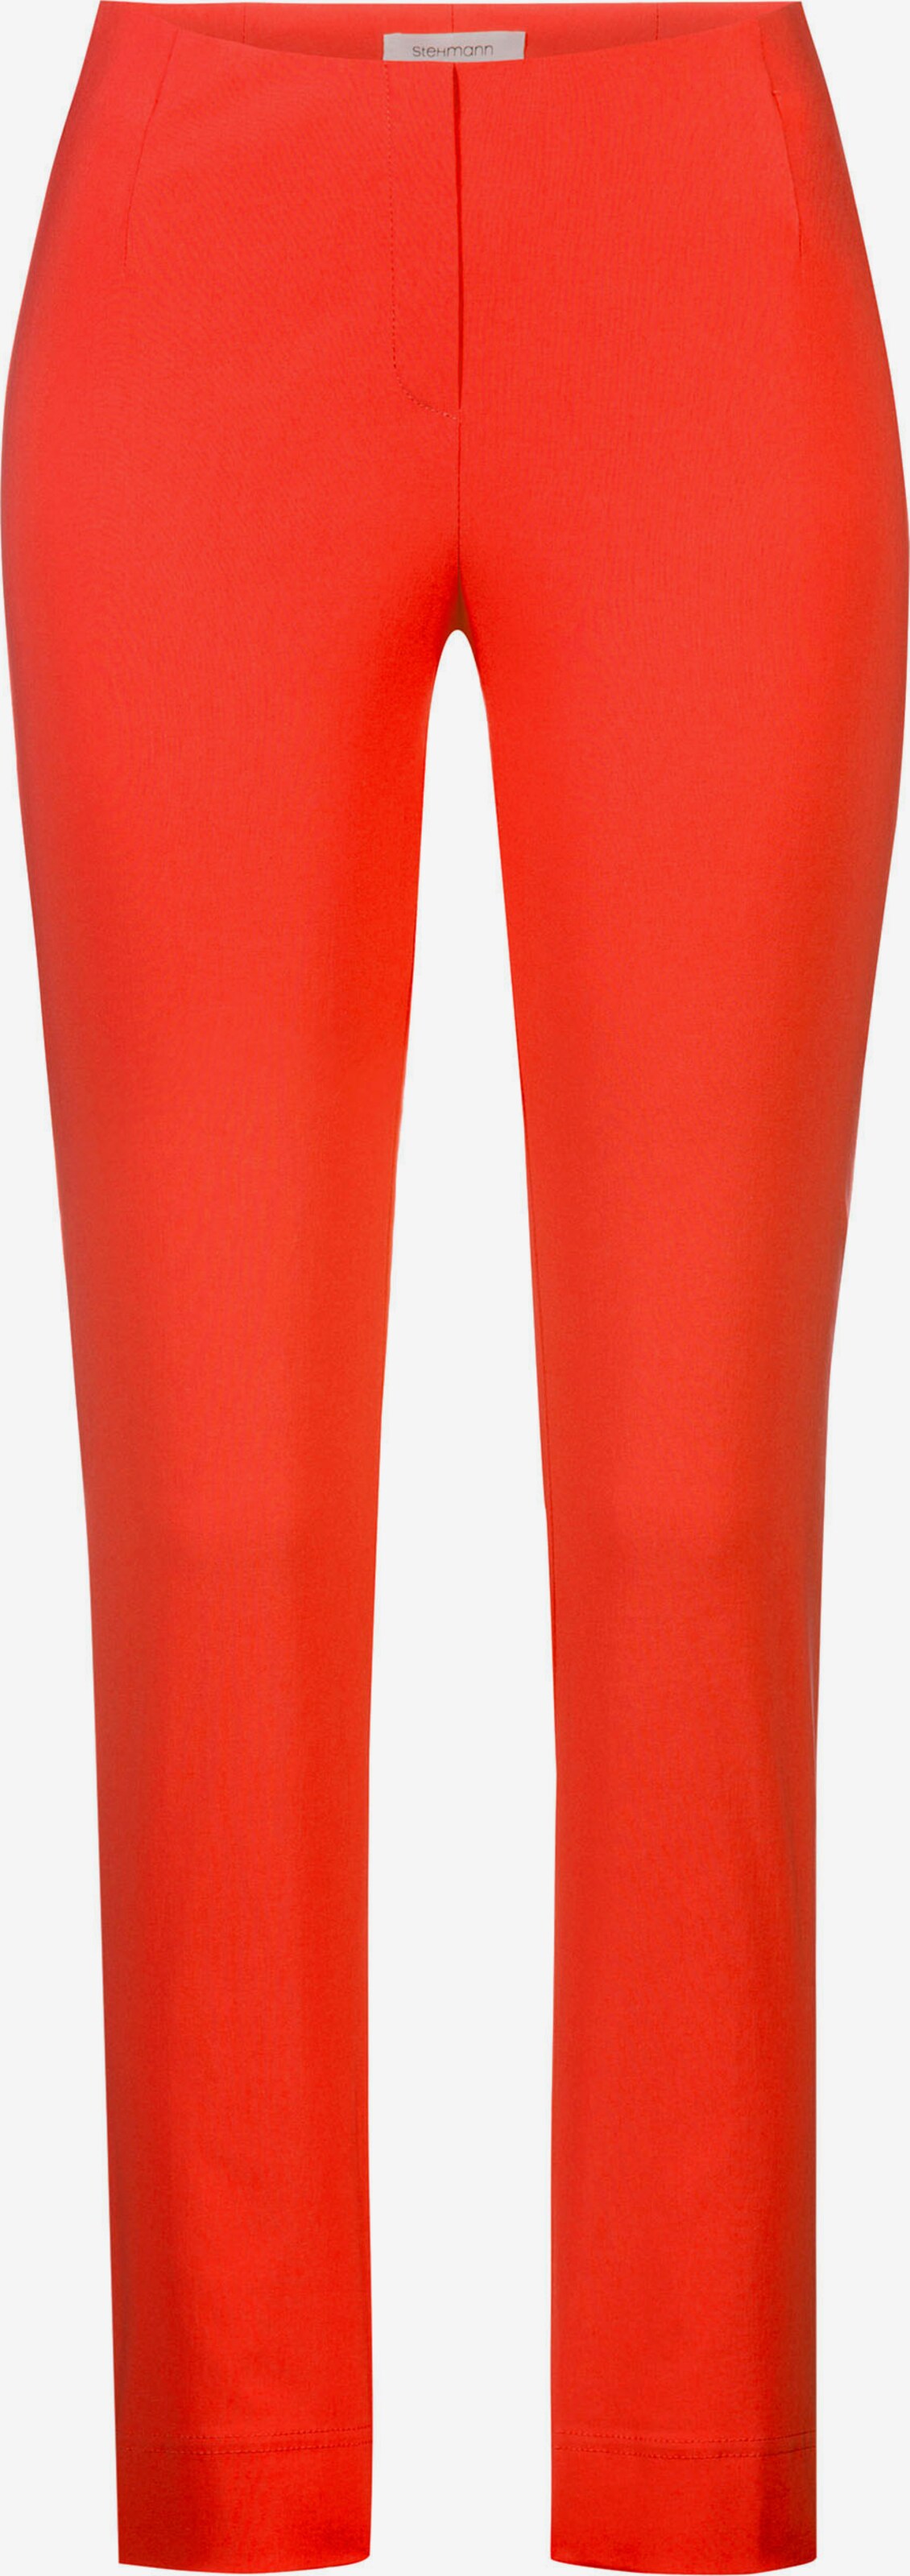 STEHMANN Slimfit Hose \'Ina\' in Orangerot | ABOUT YOU